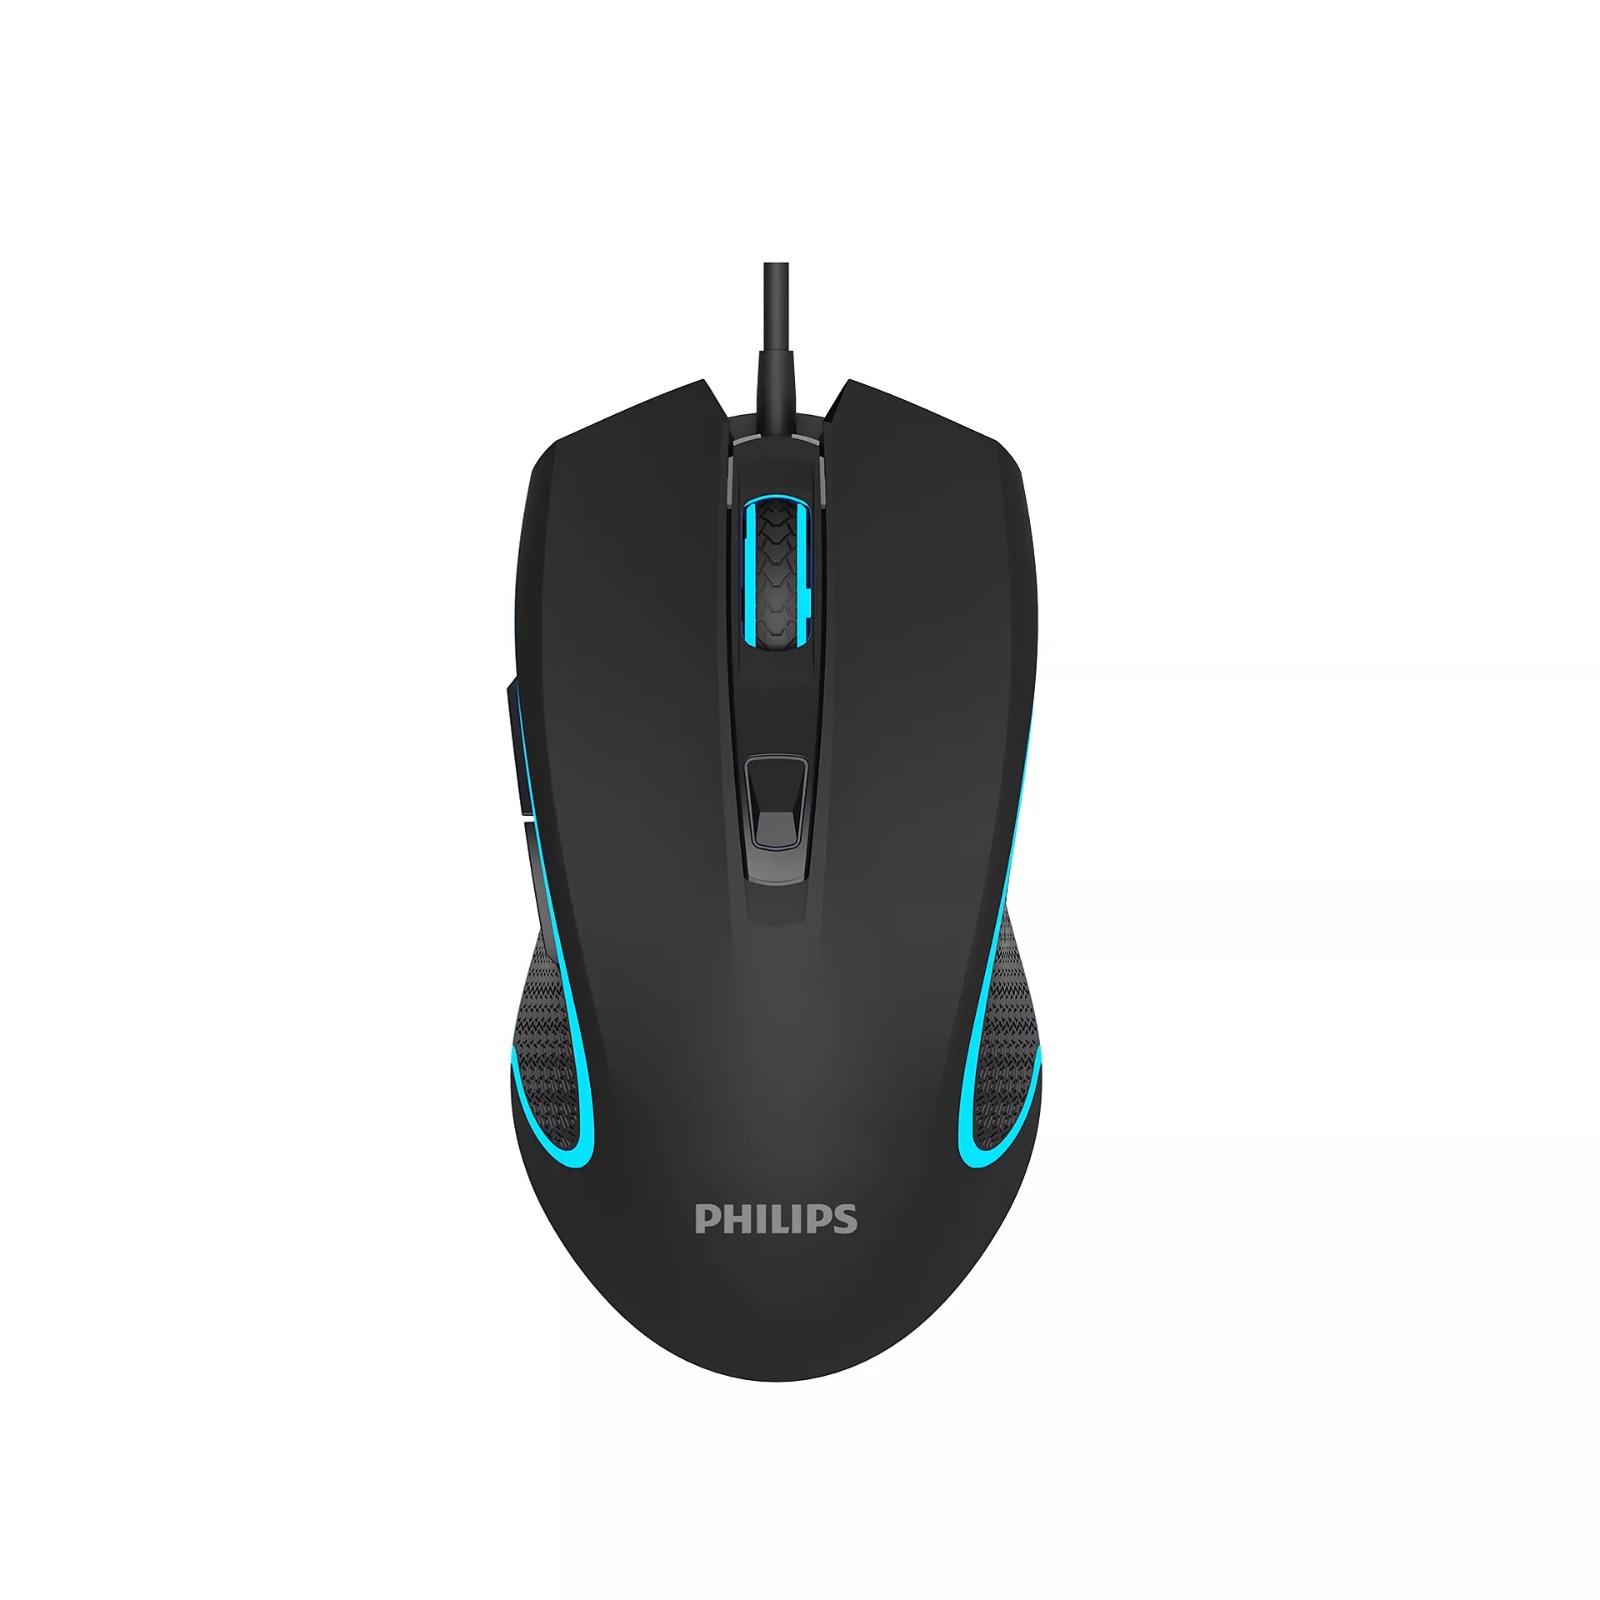 Philips Gaming Wired Mouse, 6400 DPI, Black - SPL0413